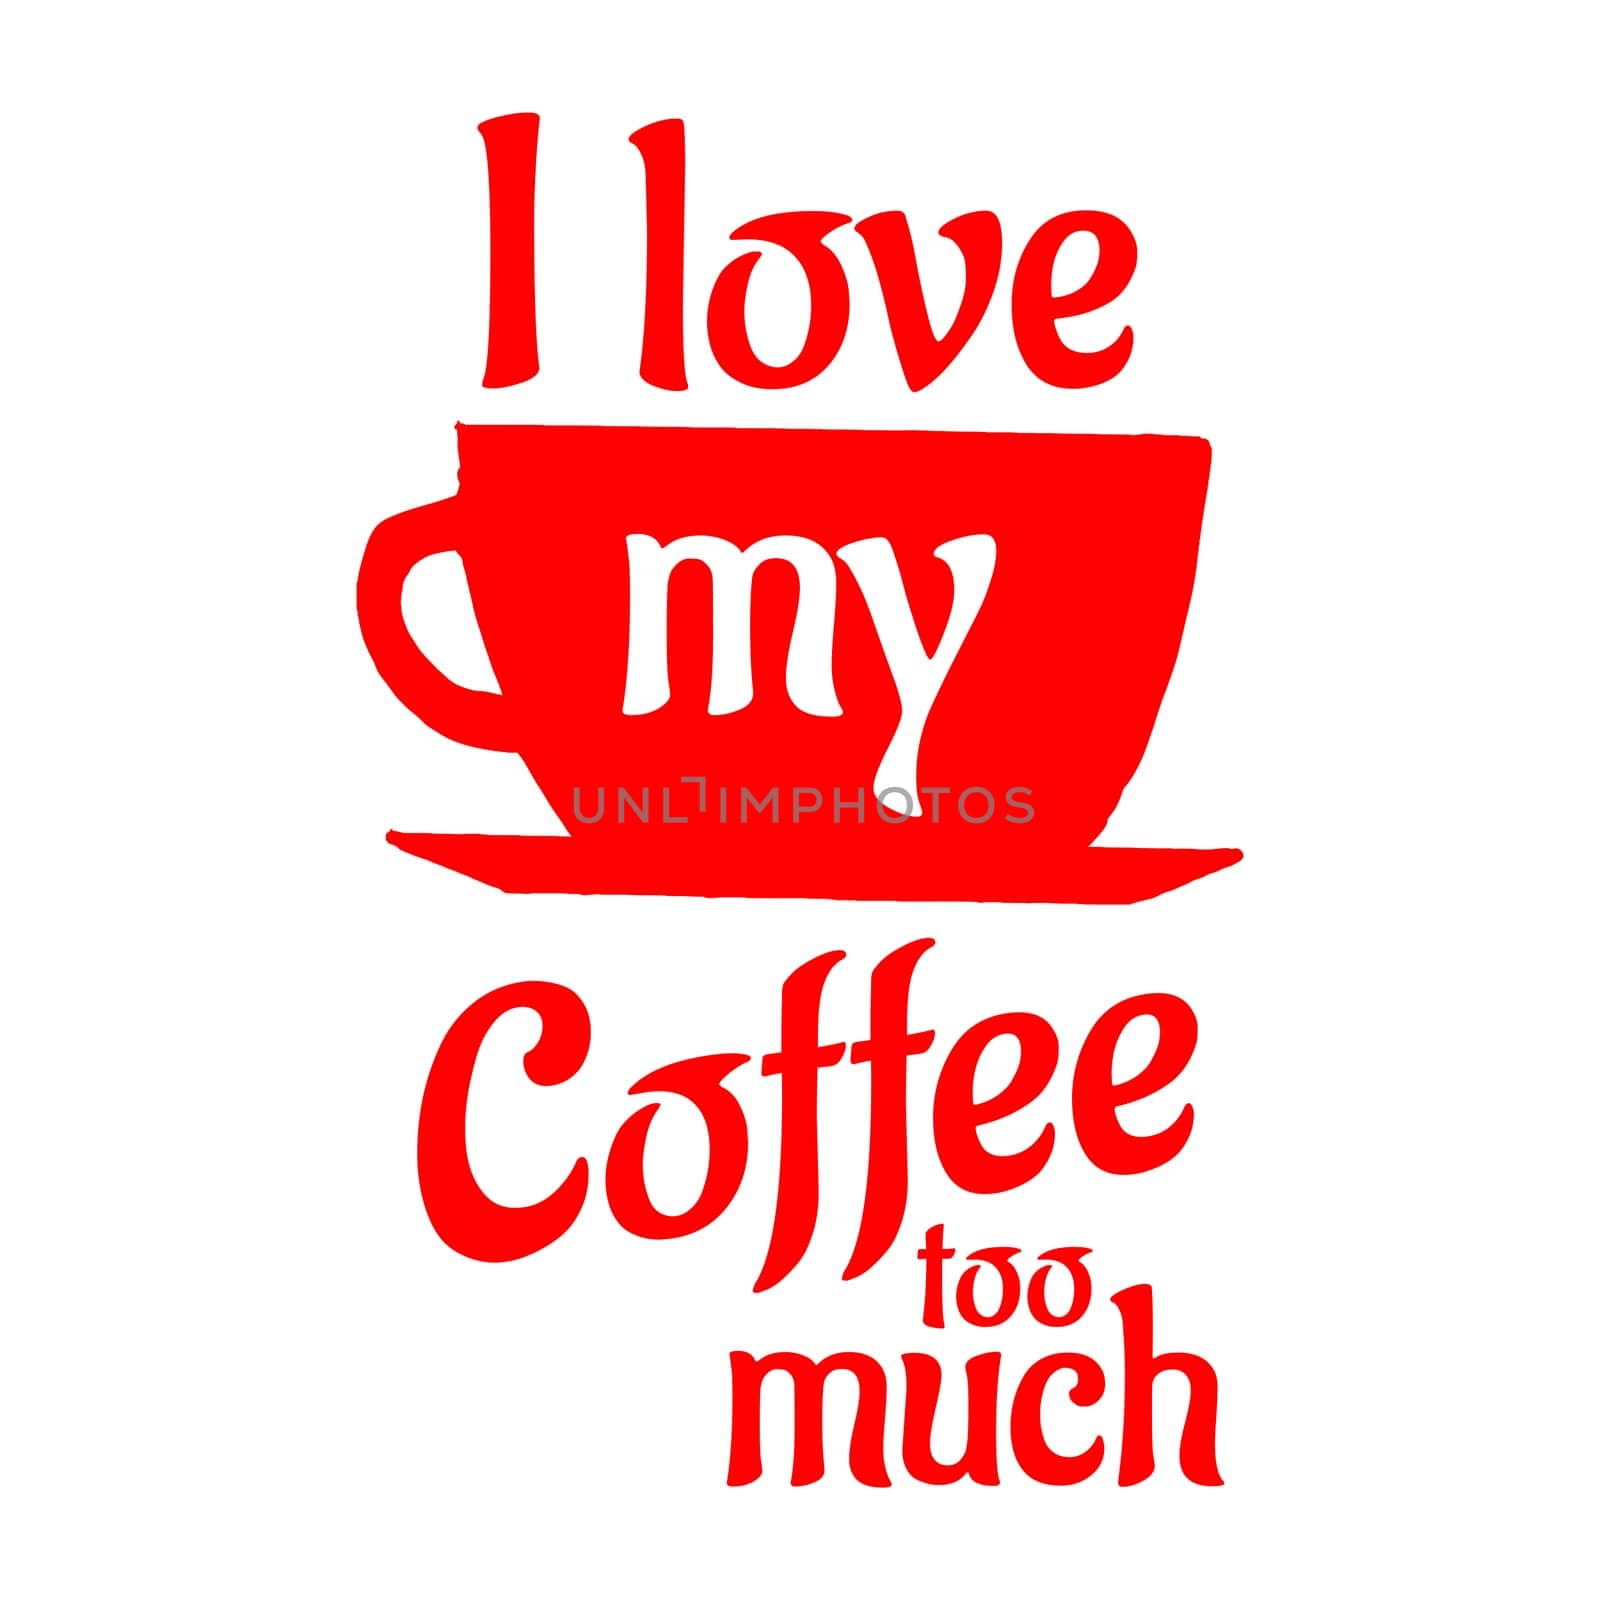 A coffee cup with the text "I love my coffee too much".